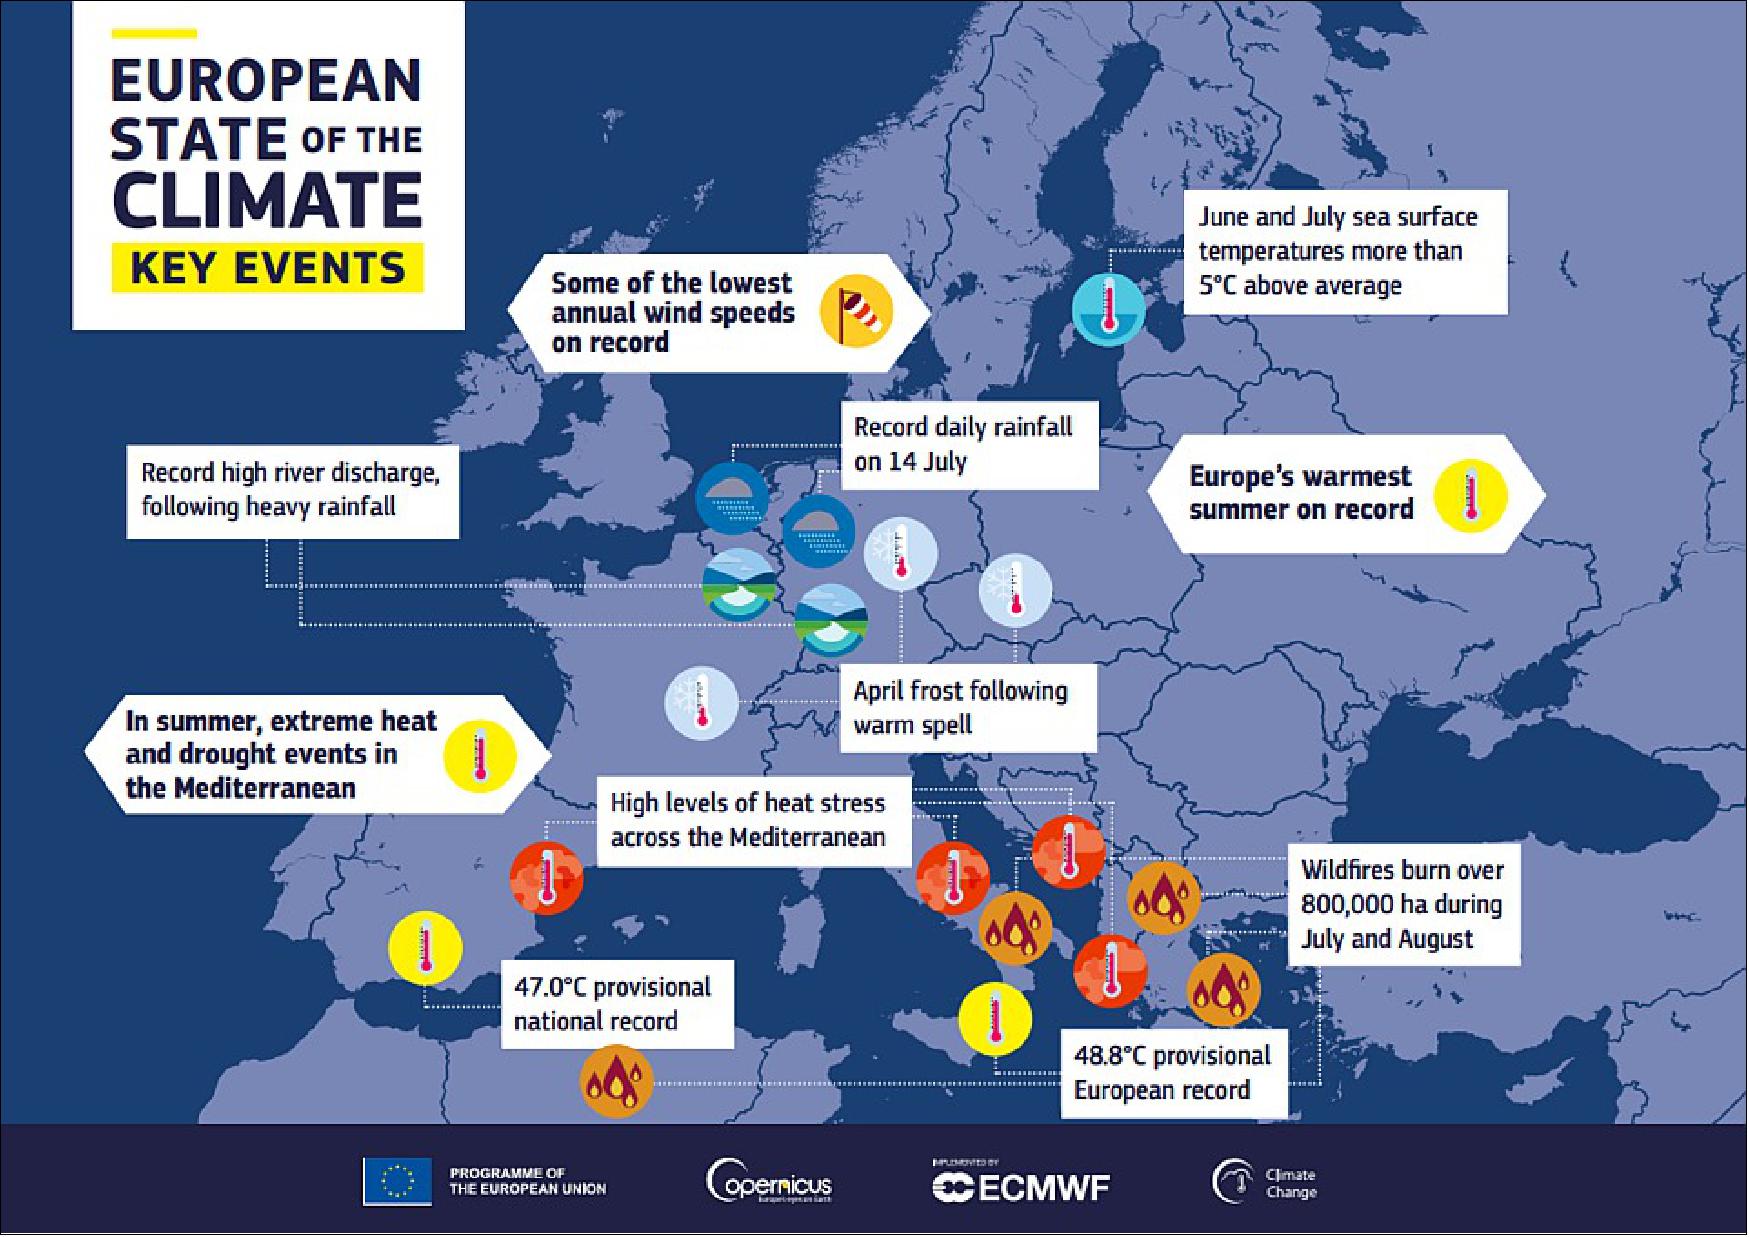 Figure 1: European State of the Climate Key Events 2021. Europe experienced its warmest summer on record in 2021, accompanied by severe floods in western Europe and dry conditions in the Mediterranean. These are just some of the key findings from the Copernicus Climate Change Service’s European State of the Climate report released today (image credit: Copernicus Climate Change Service)